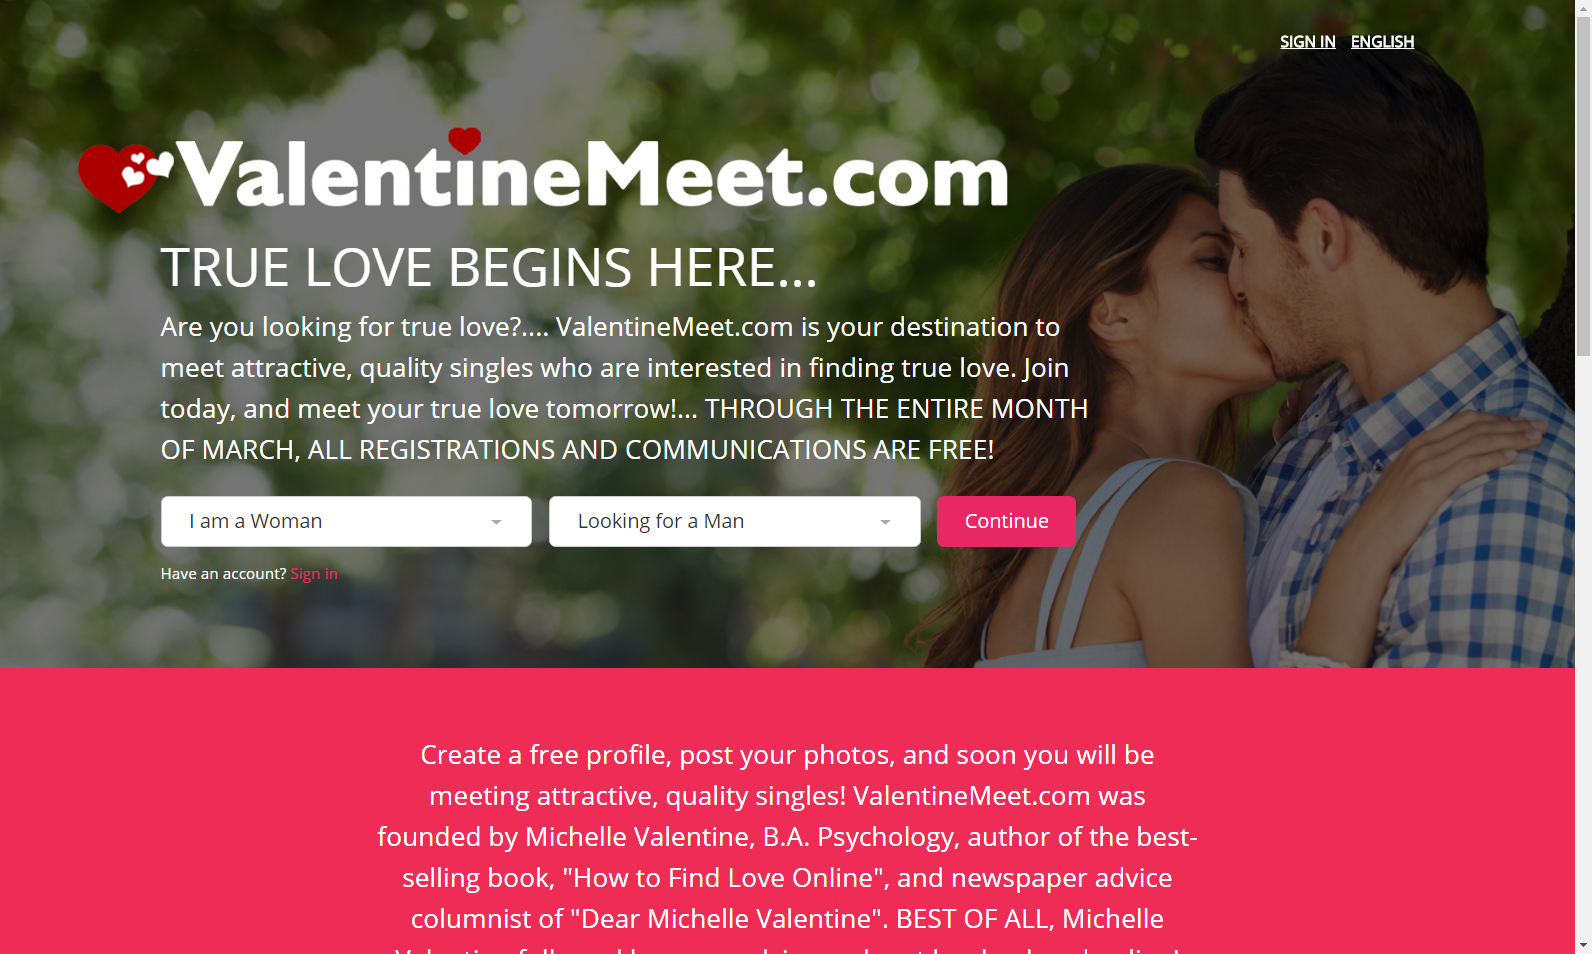 Dating site run by psychologist